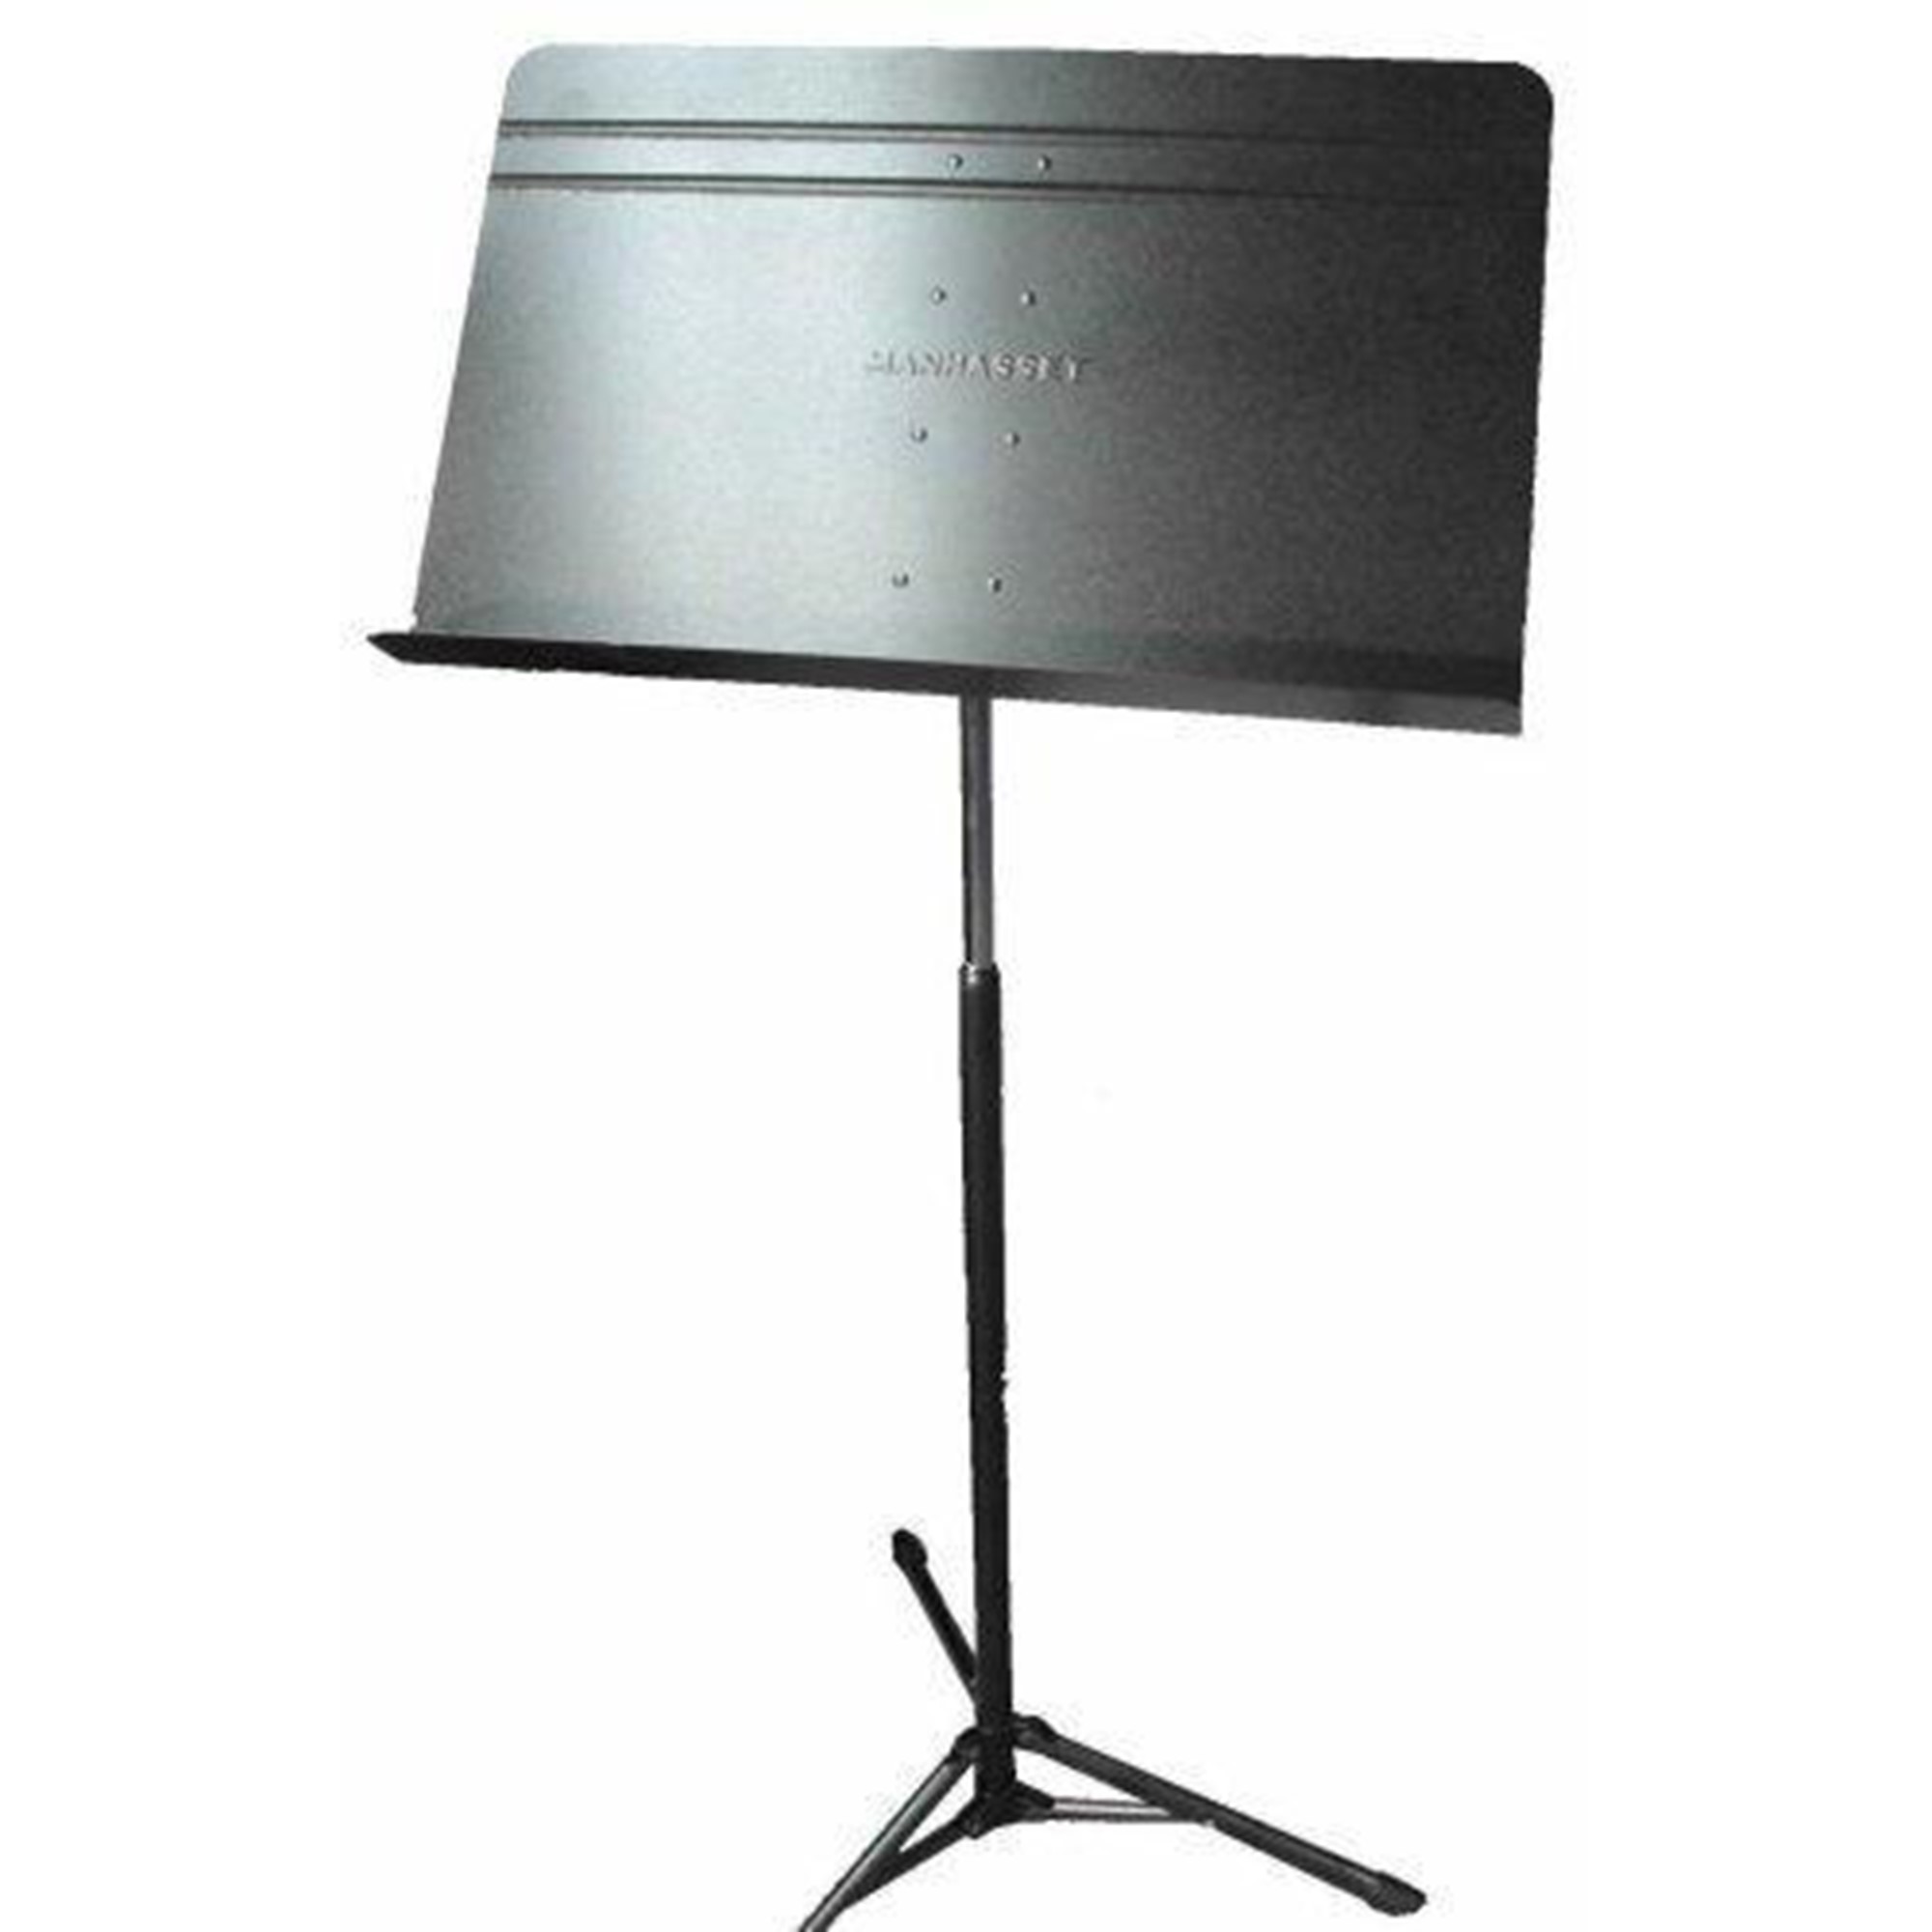 Manhasset Voyager Music Stand with Collapsing Legs | SHAR Music ...